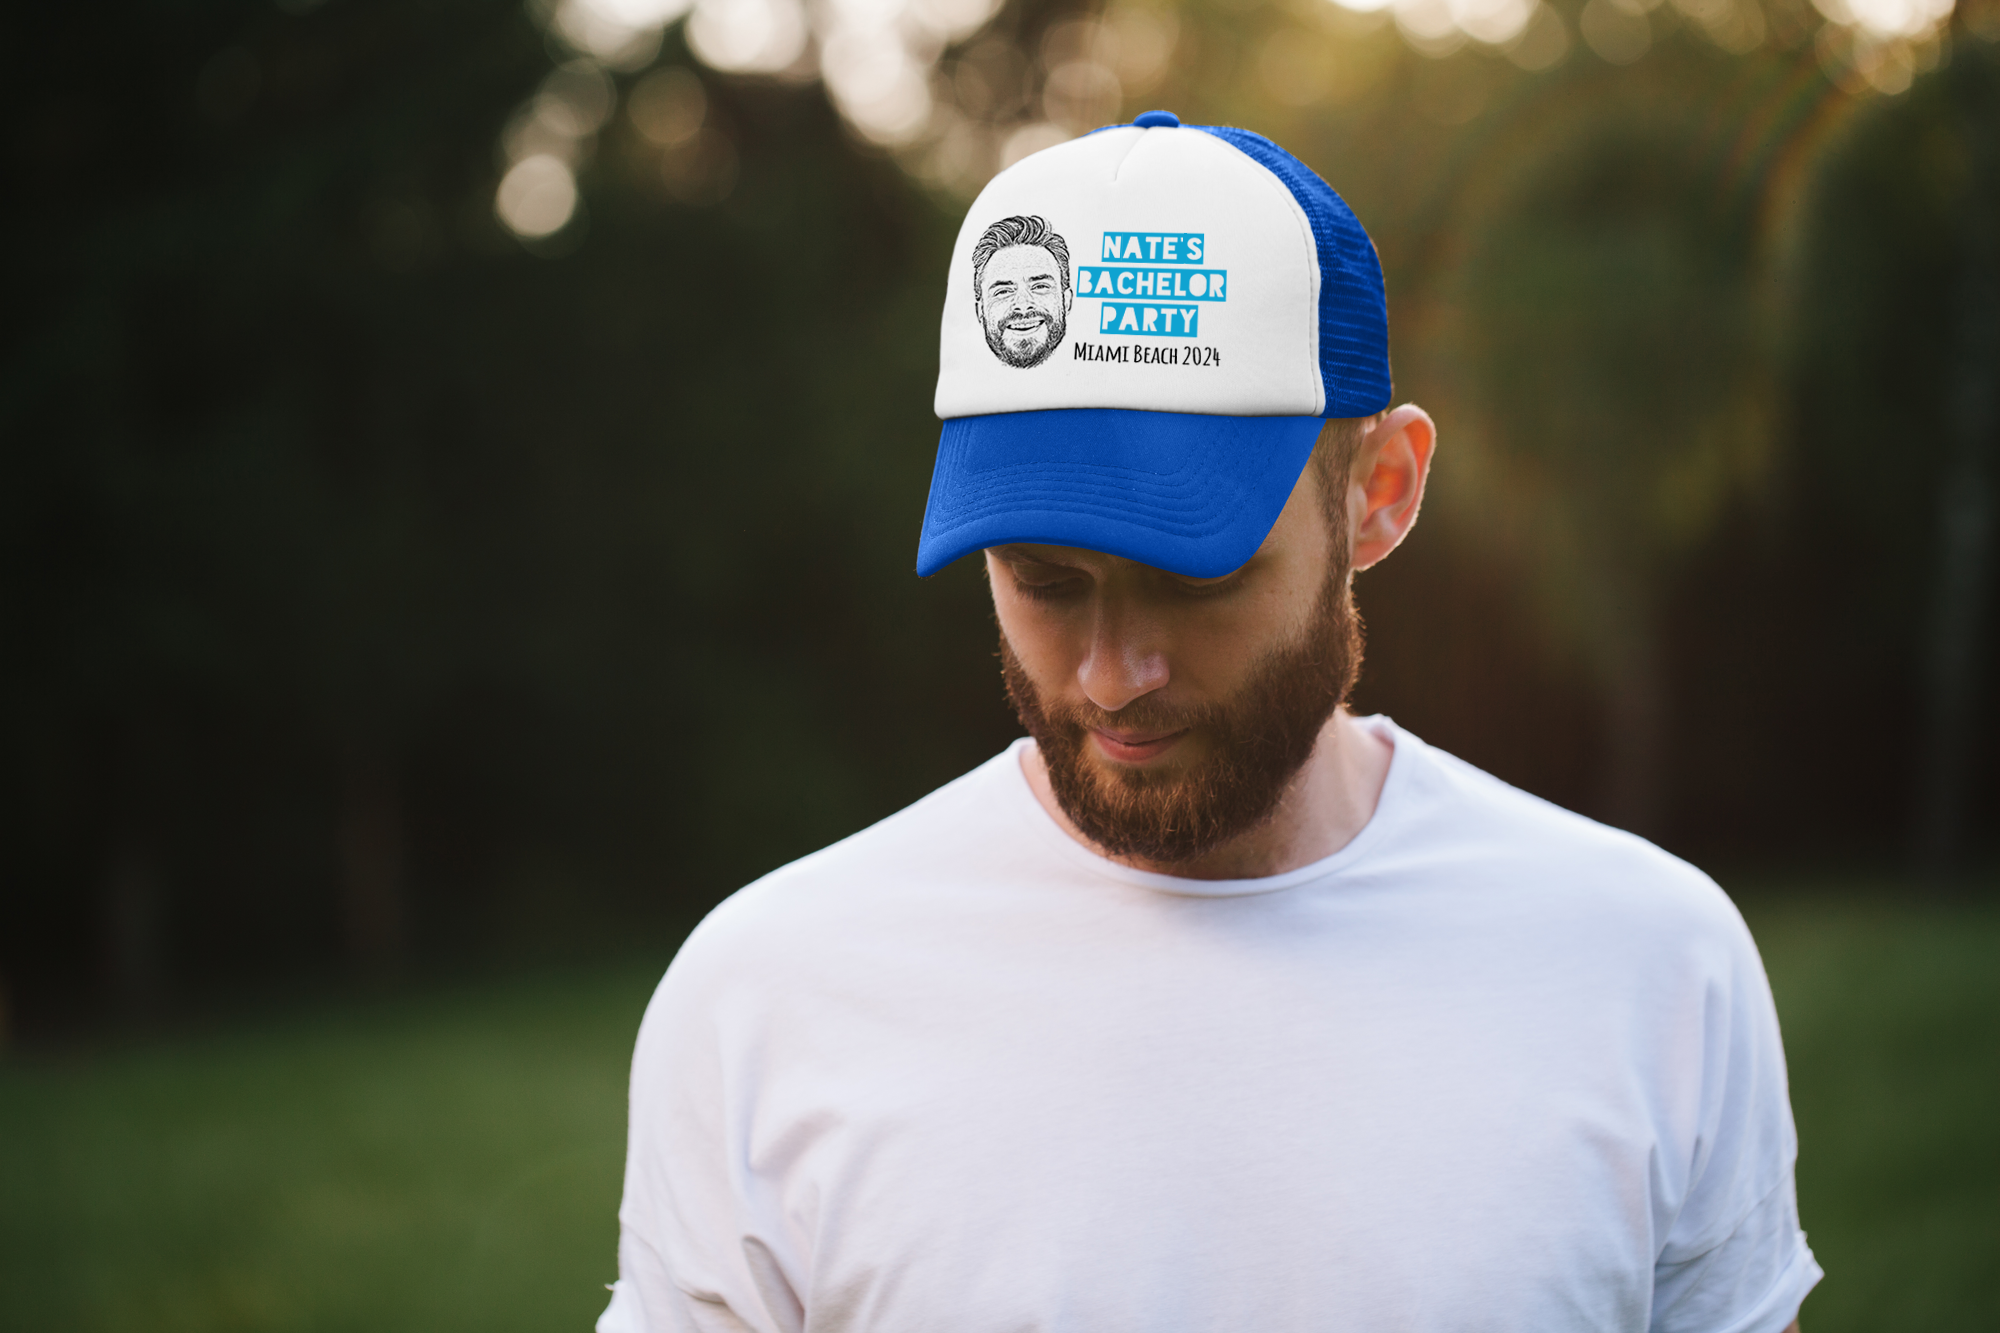 Custom Blue Bachelor Party Trucker Hat | Custom Bachelor Party Hats with Photo